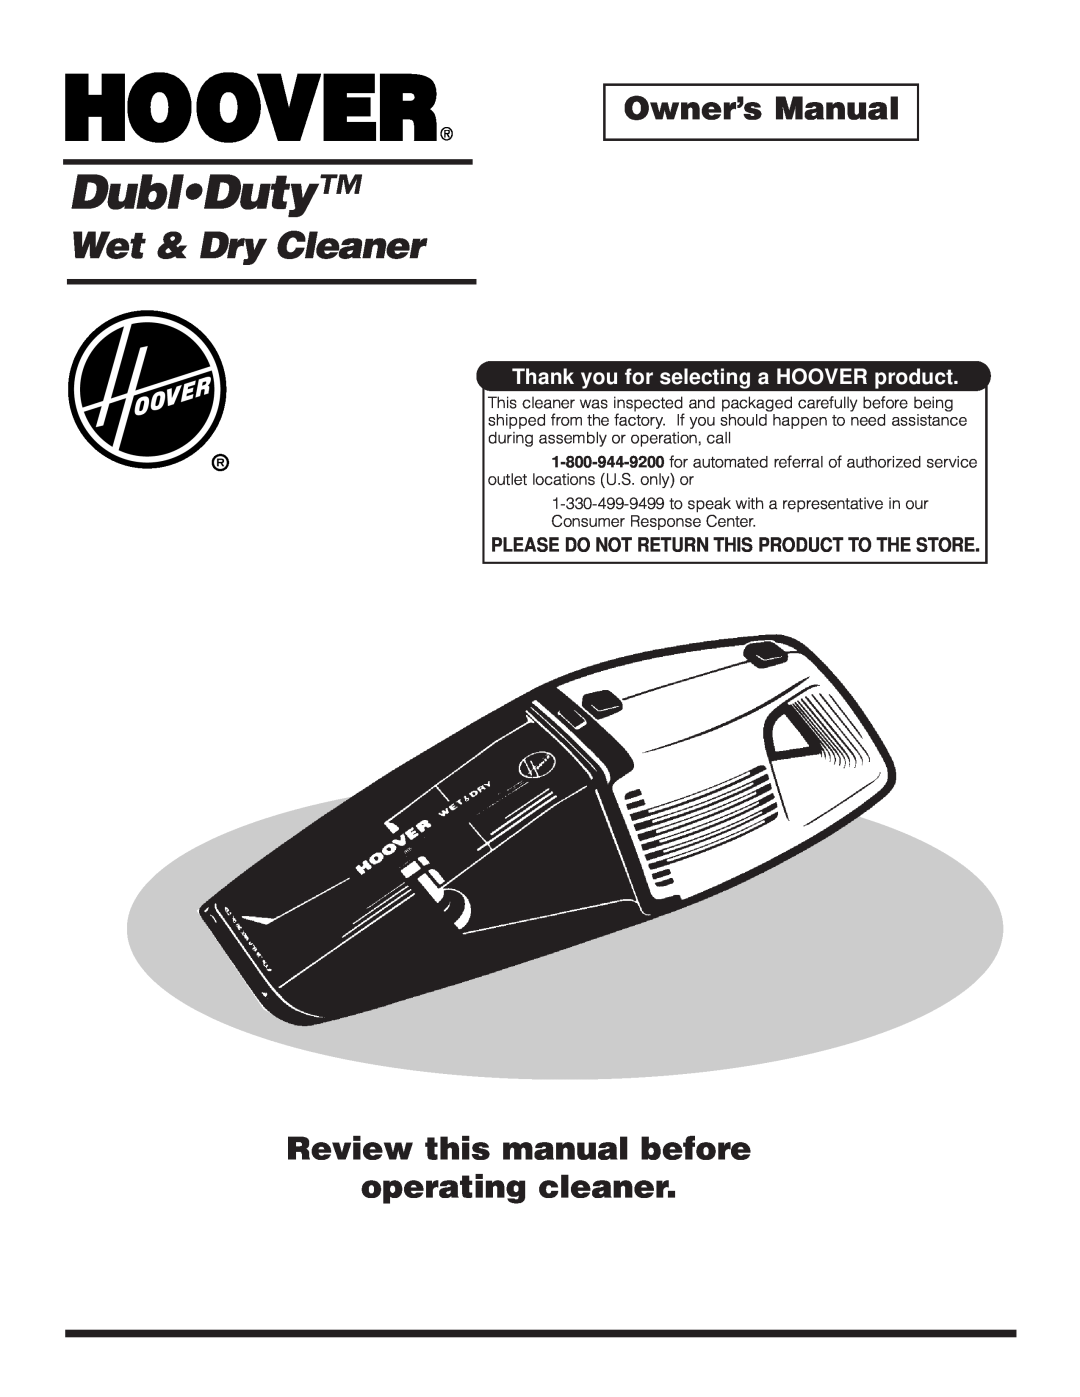 Hoover Dubl-Duty owner manual Owner’s Manual, Review this manual before operating cleaner, DublDuty, Wet & Dry Cleaner 